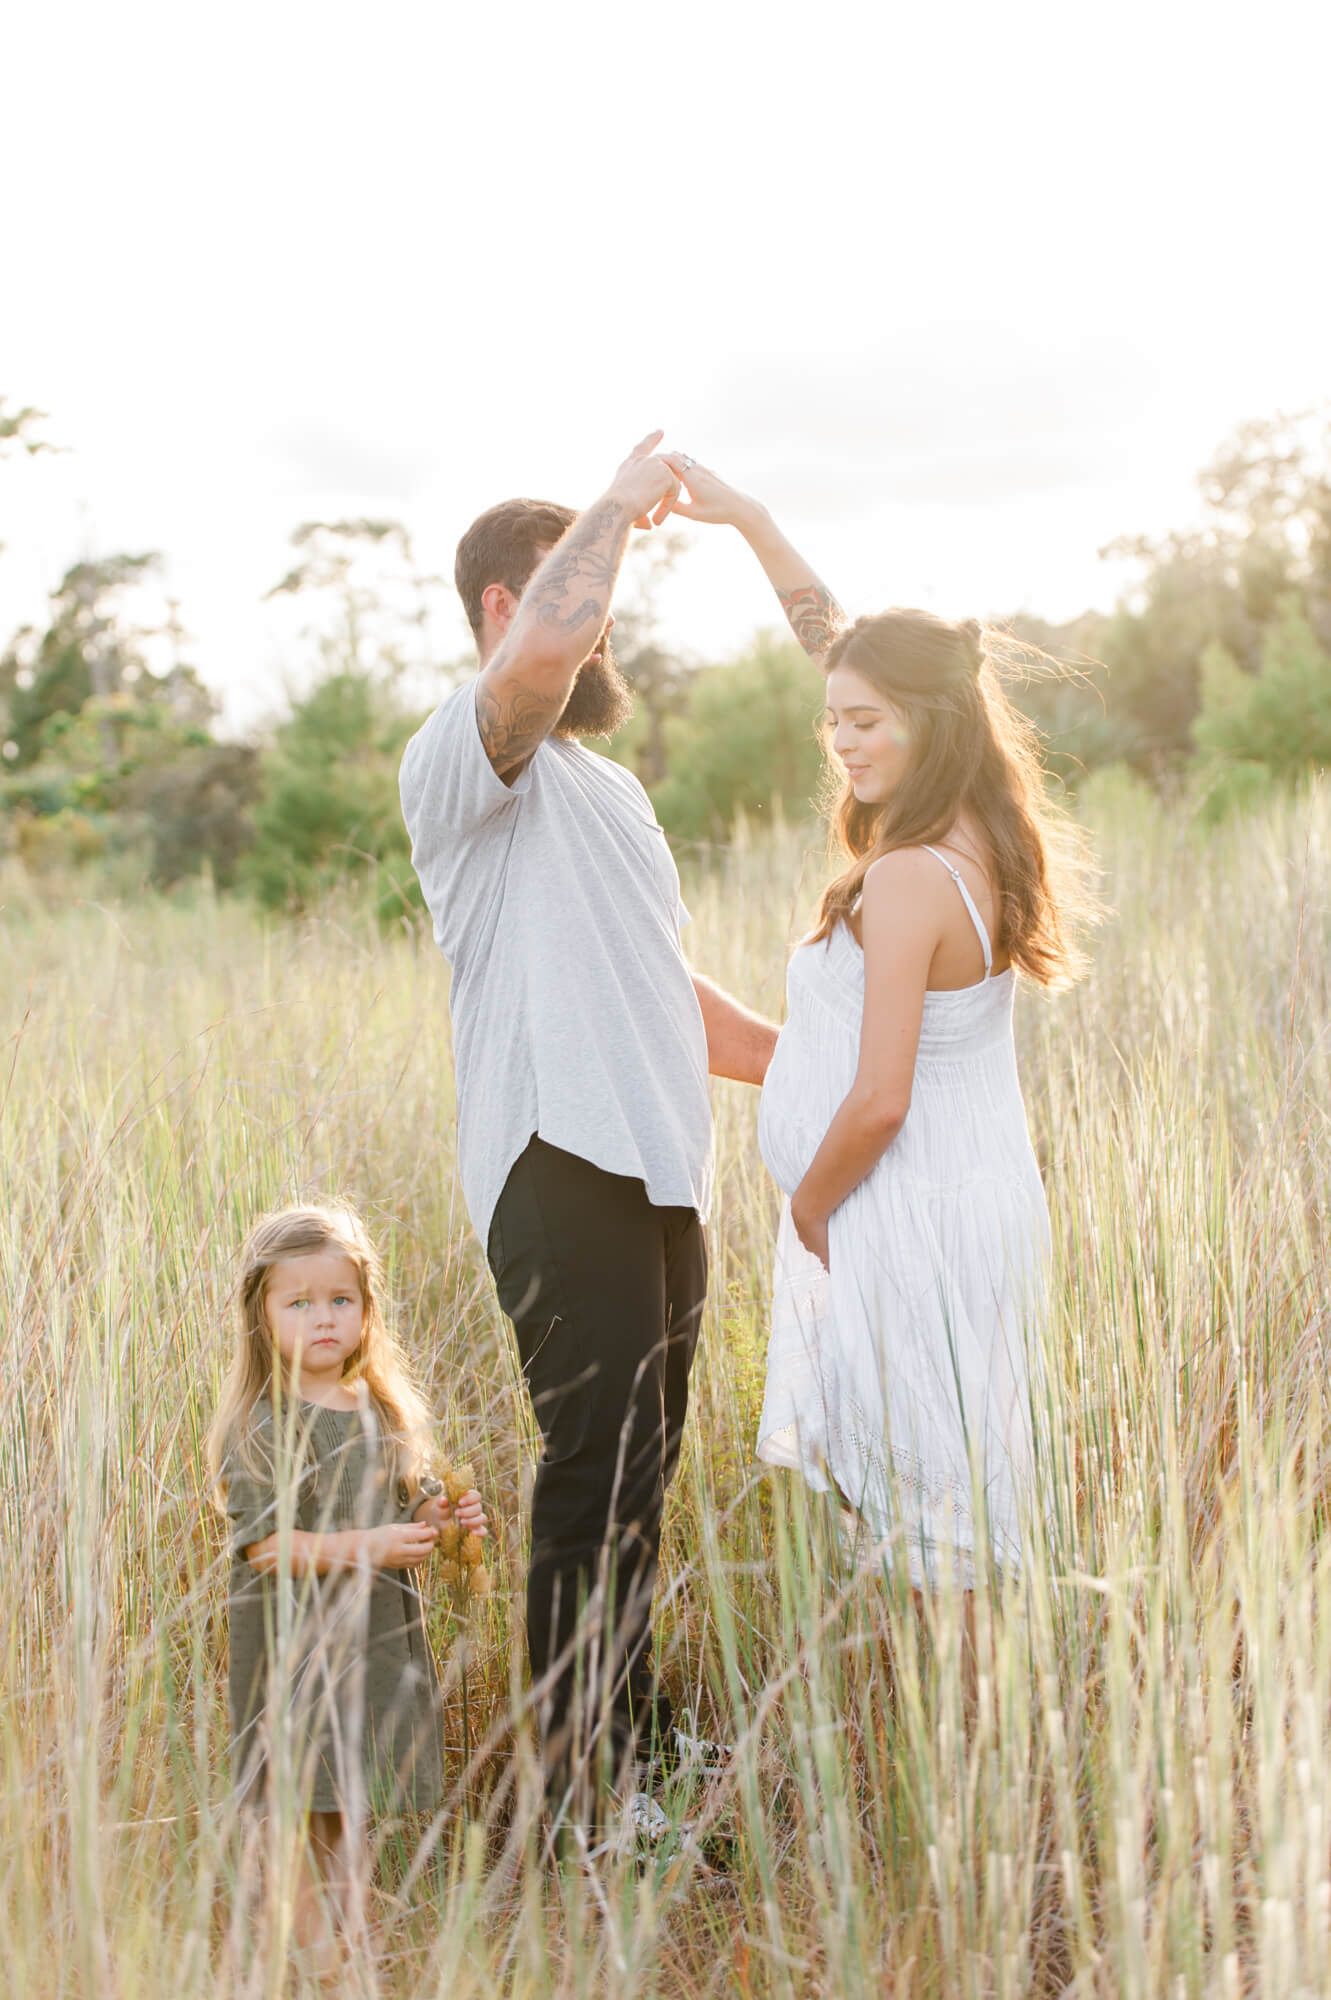 Family stands in tall grass field dancing while husband twirls wife during their maternity photos Heart 2 heart birth center